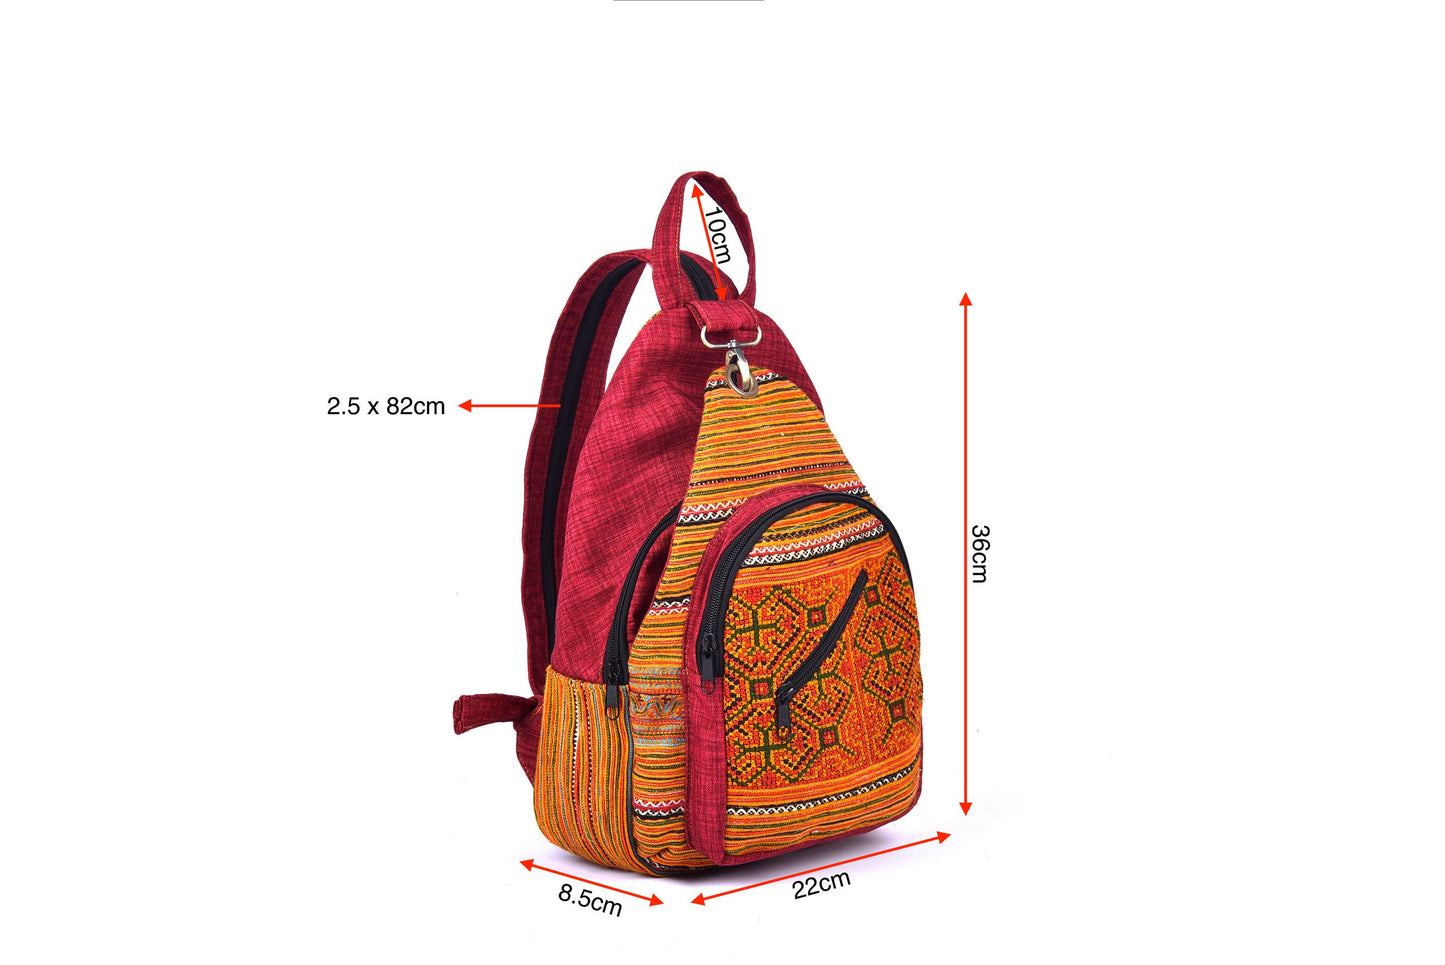 Multi-purpose backpack and sling, blue hand-embroidery fabric, light orange trim